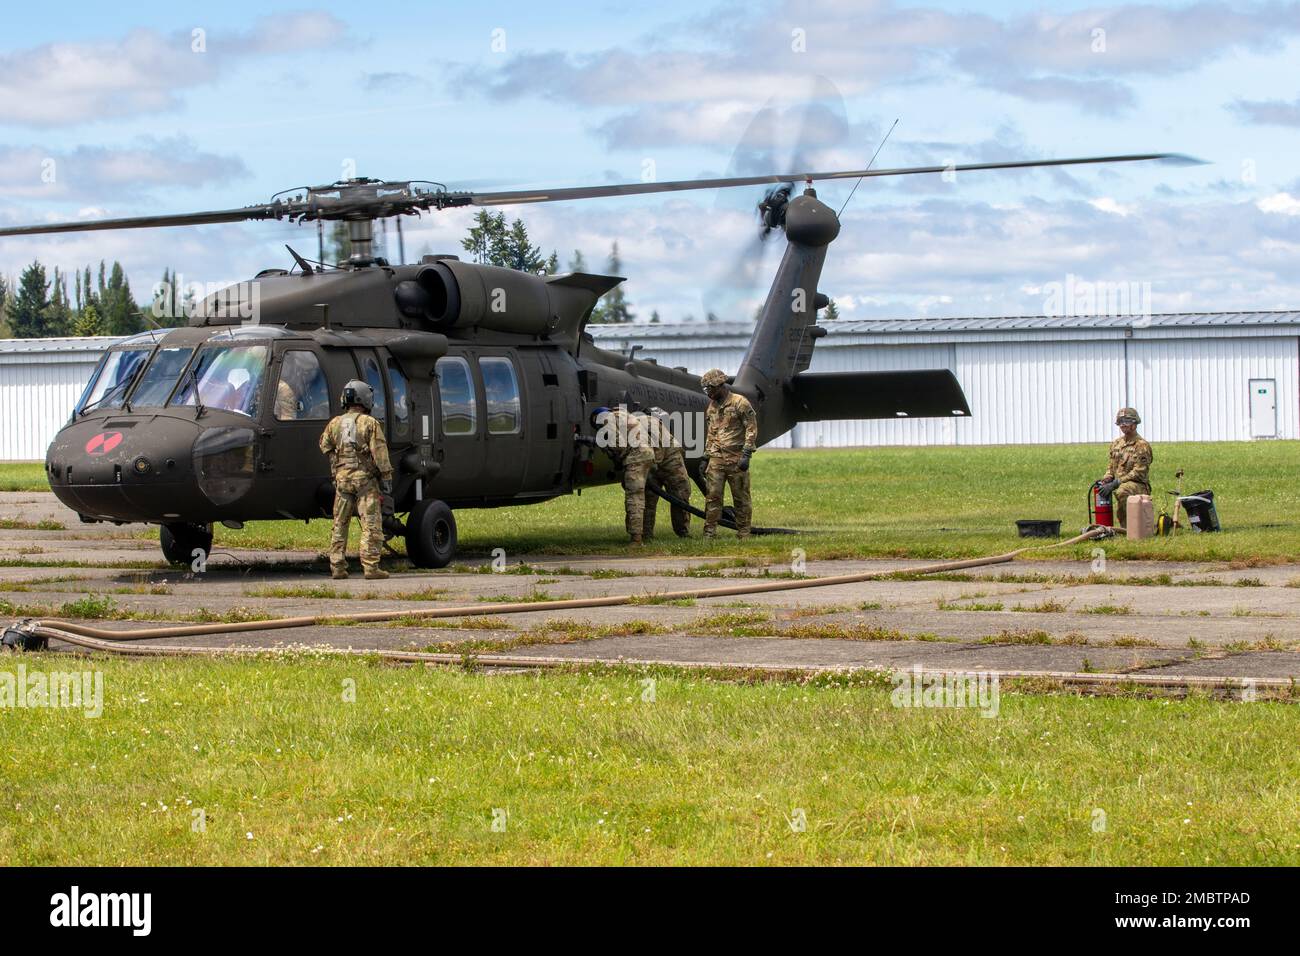 Soldiers assigned to Alpha Company, 46th Aviation Support Battalion, 16th Combat Aviation Brigade, operate a forward arming and refueling point at the Chehalis-Centralia Airport, Wash. on Jun. 22, 2022. The Soldiers were training U.S. Army Reserve and U.S. Air Force servicemembers on helicopter refueling procedures. Stock Photo